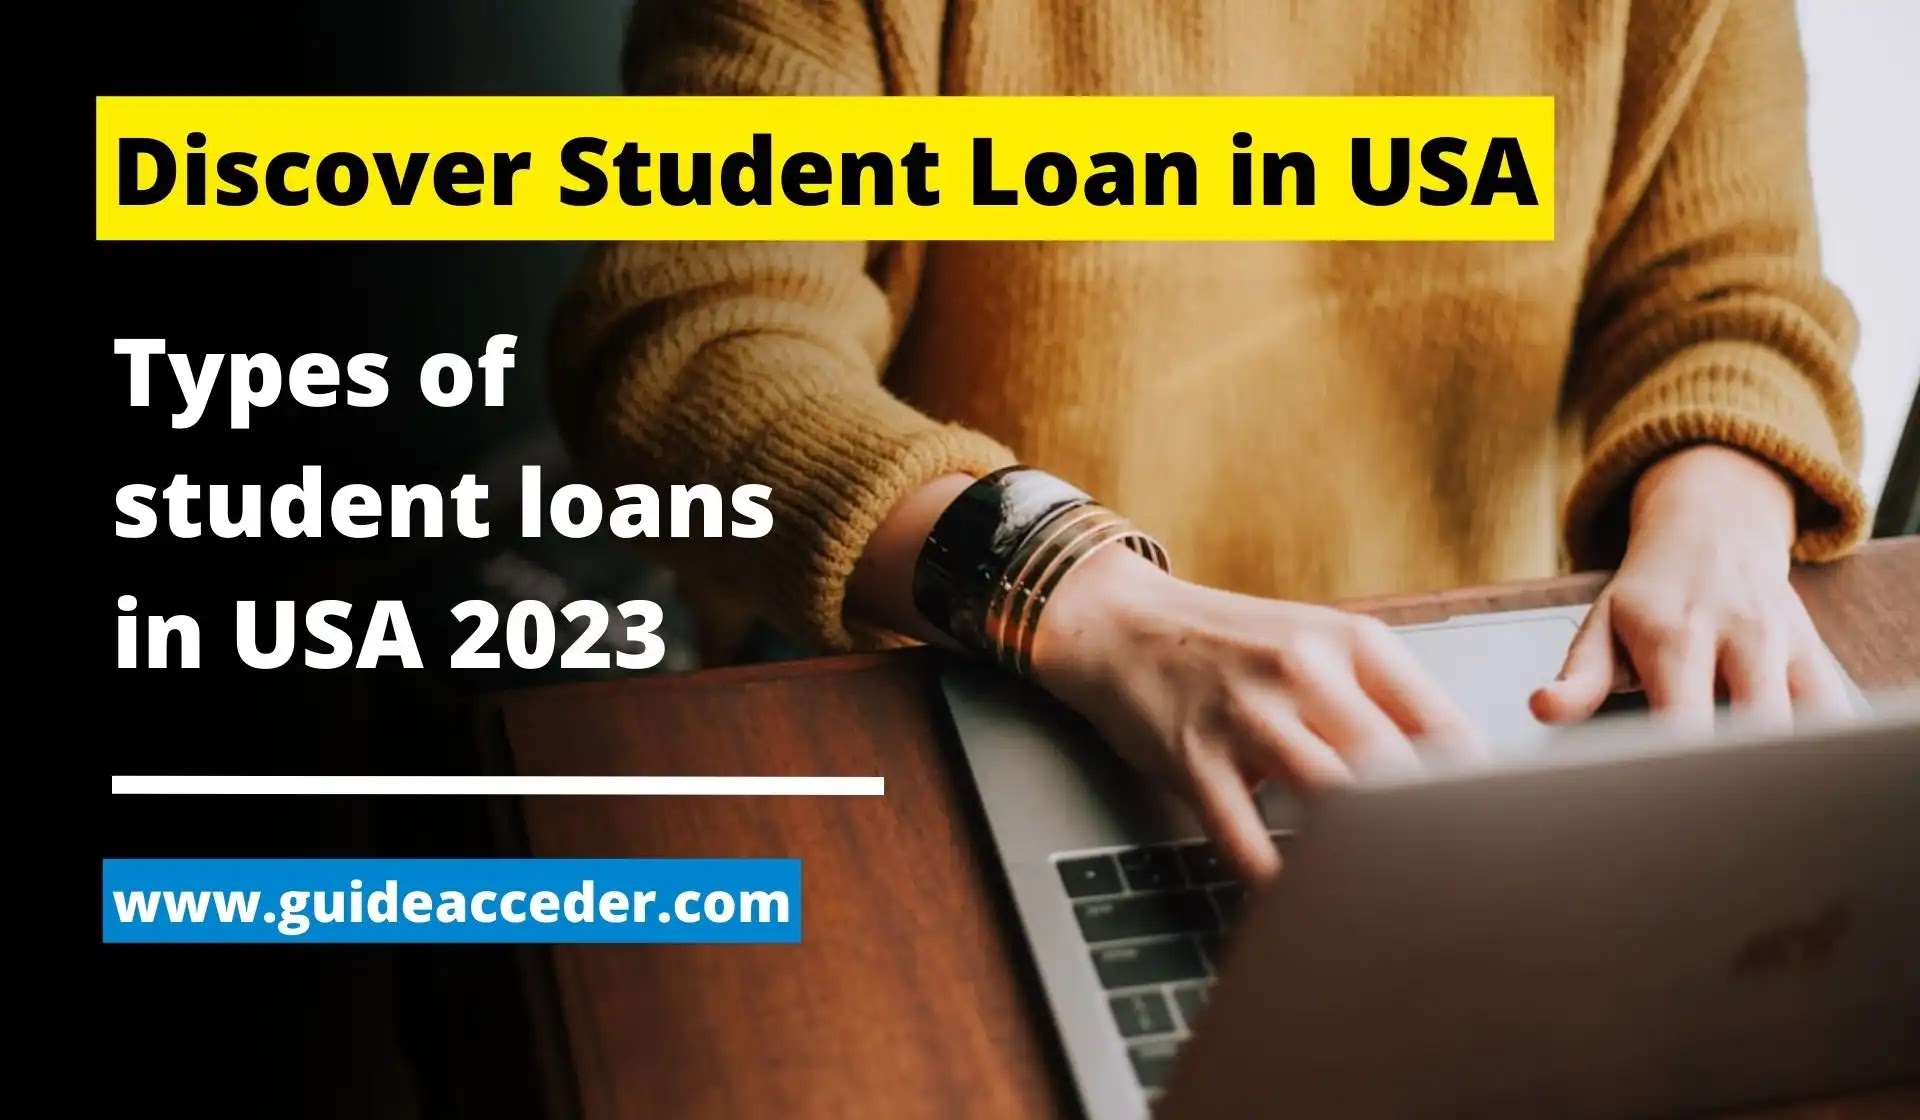 Discover student loans USA 2023